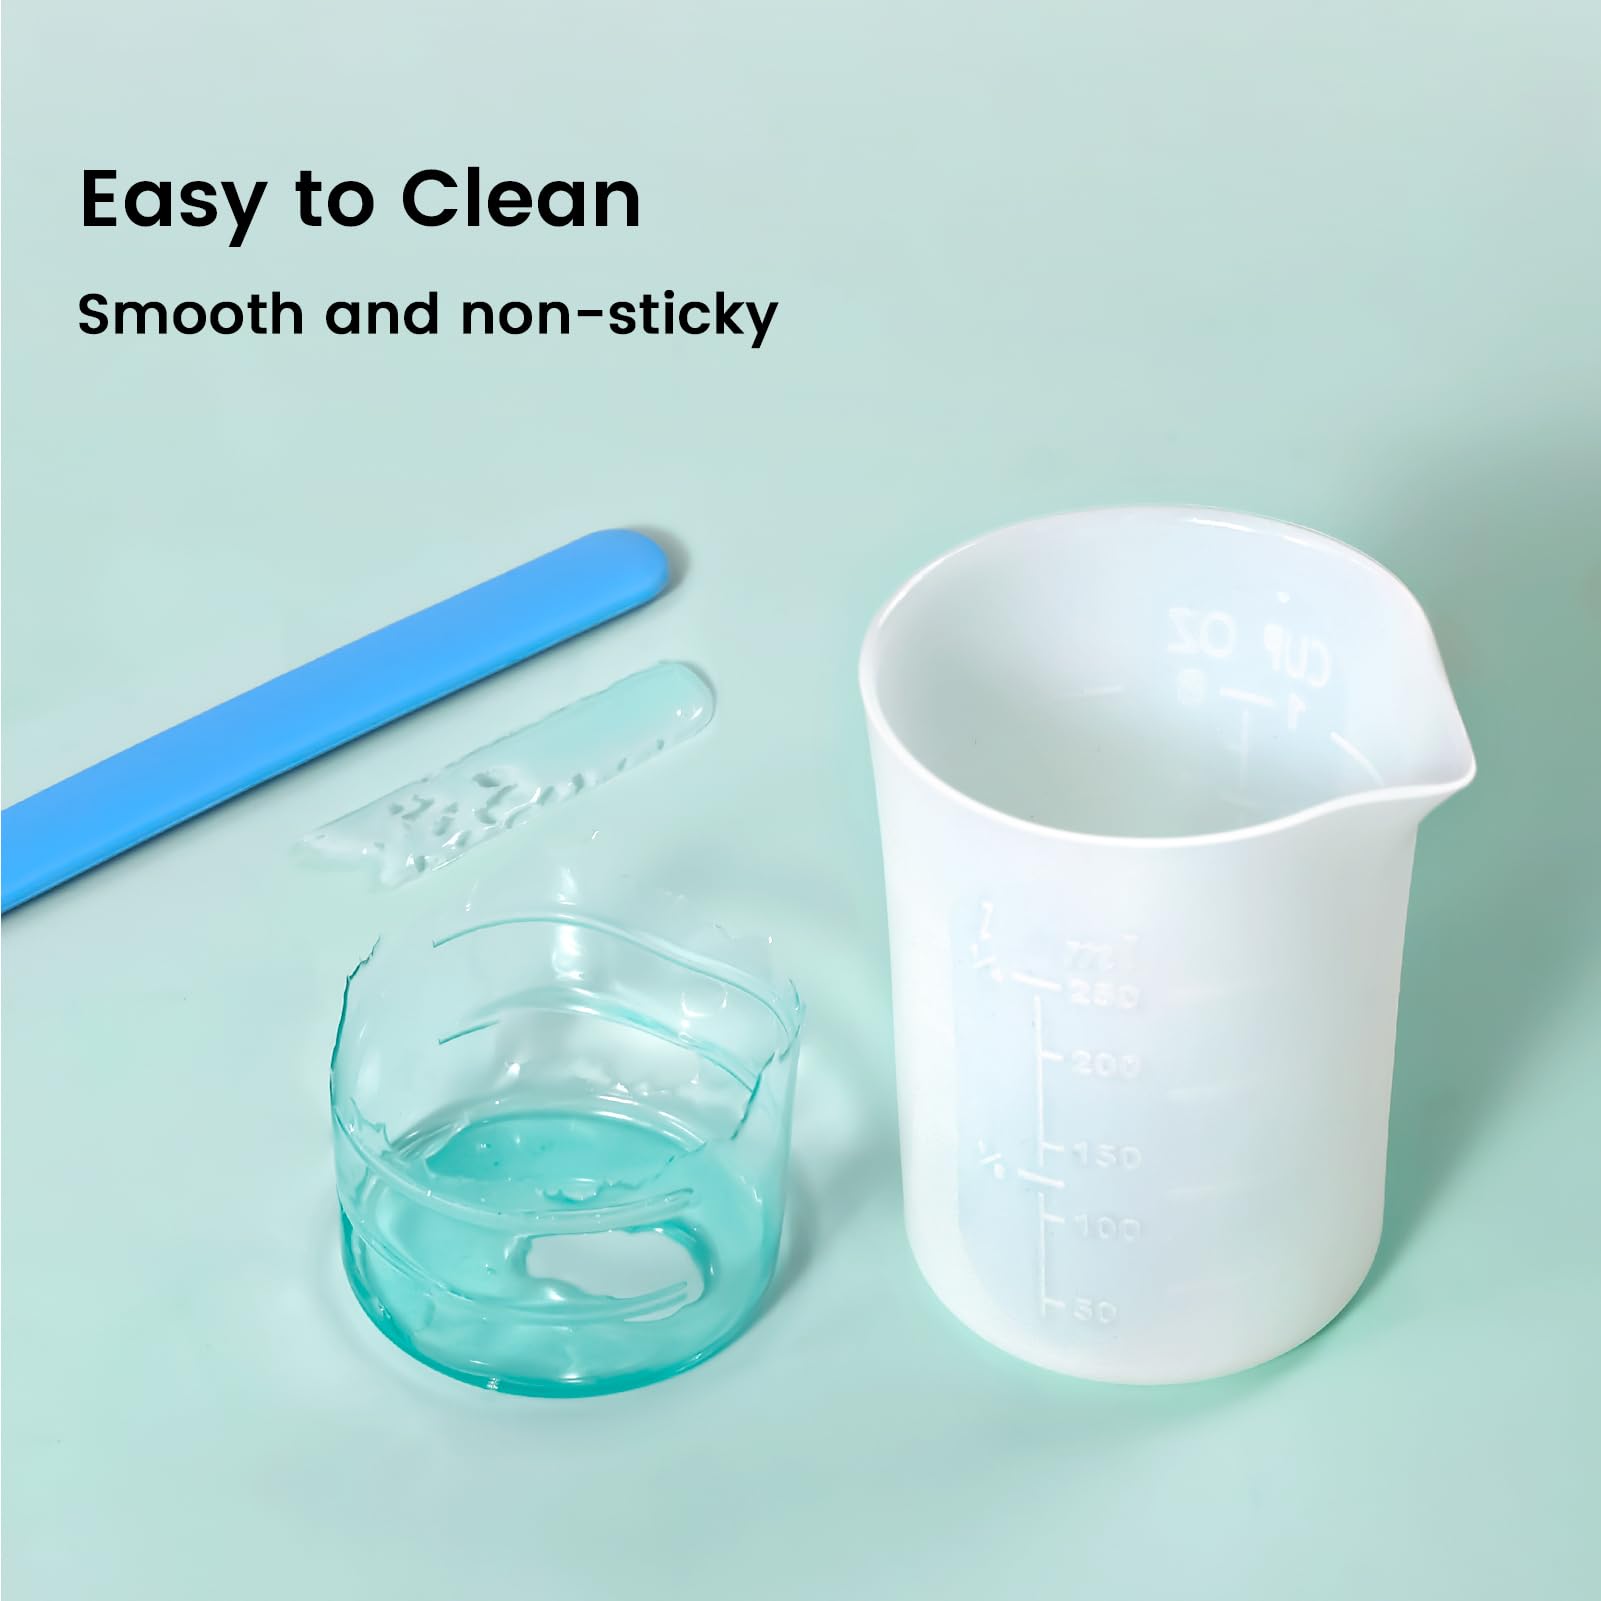 Silicone Epoxy Resin Measuring Cups Tool Kit With Stir Sticks Finger Cots  For Resin Mixing Jewelry